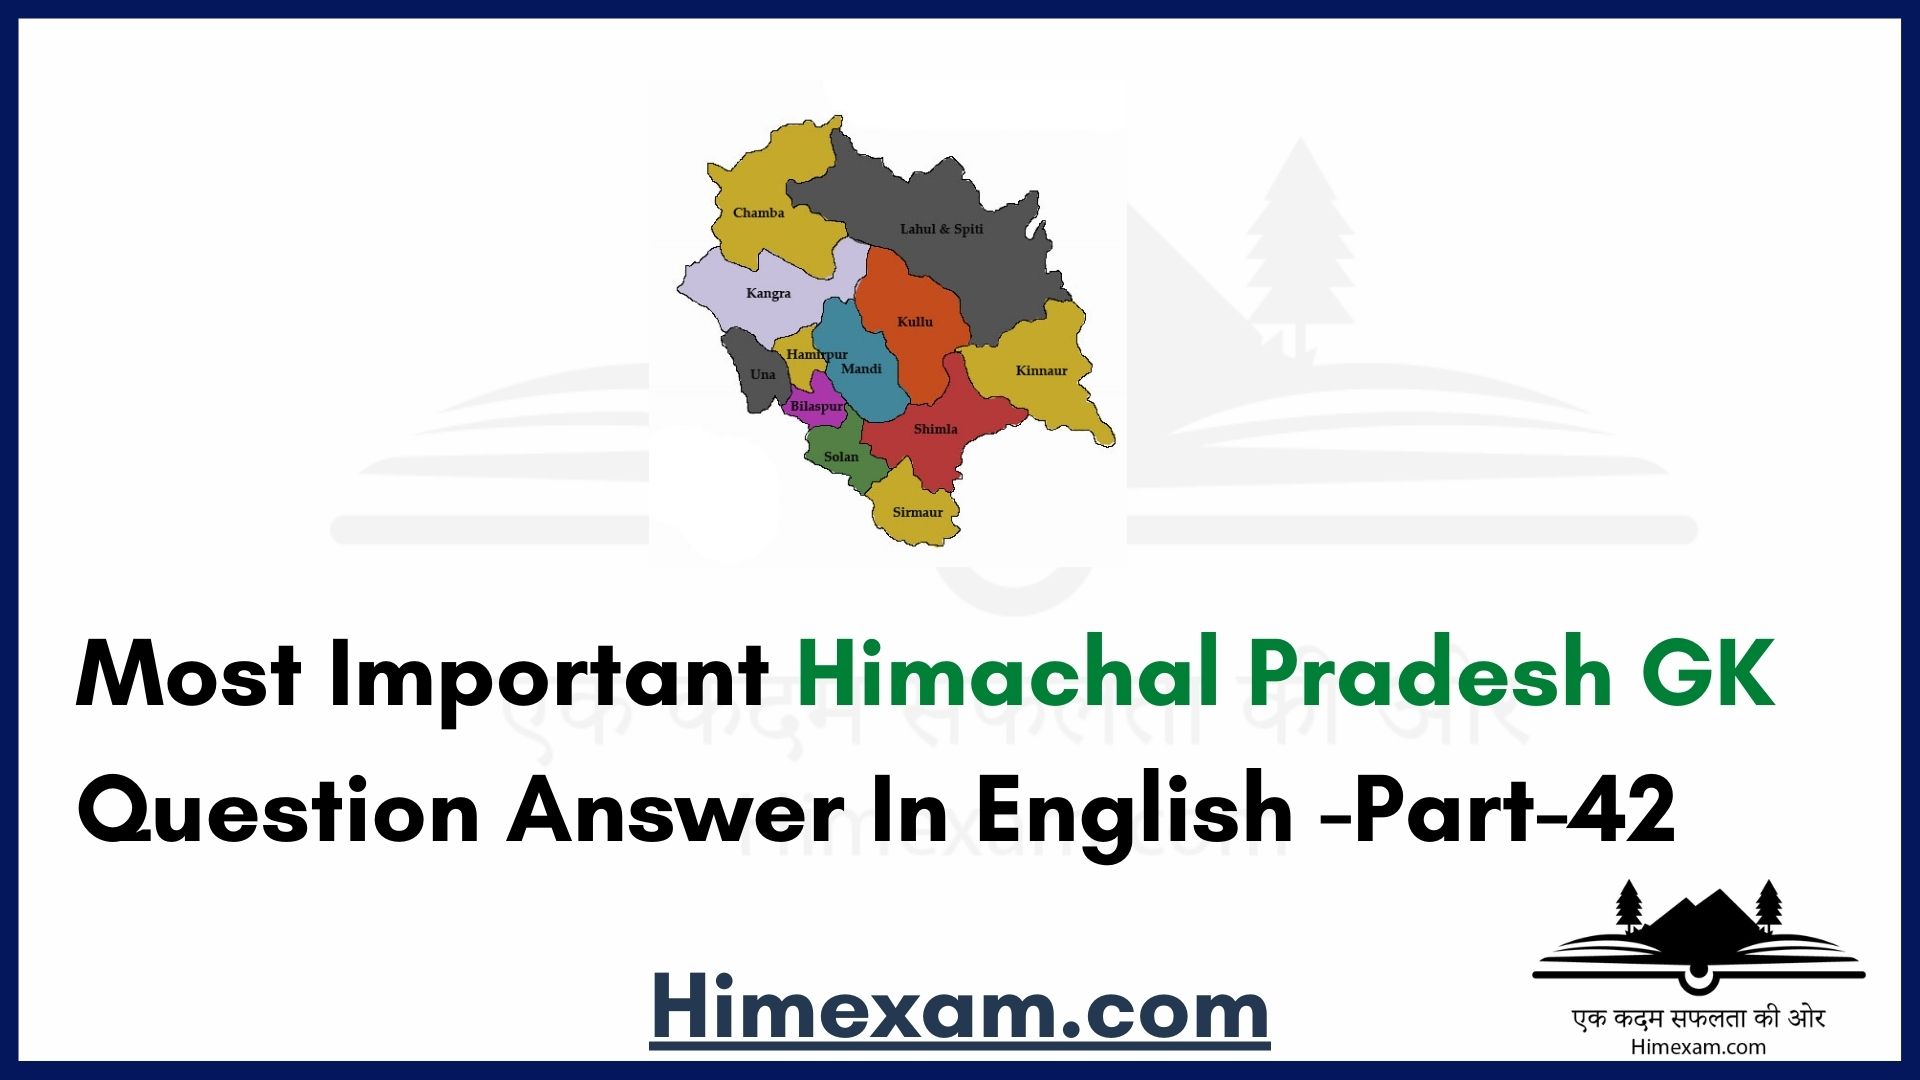 Most Important Himachal Pradesh GK Question Answer In English -Part-42